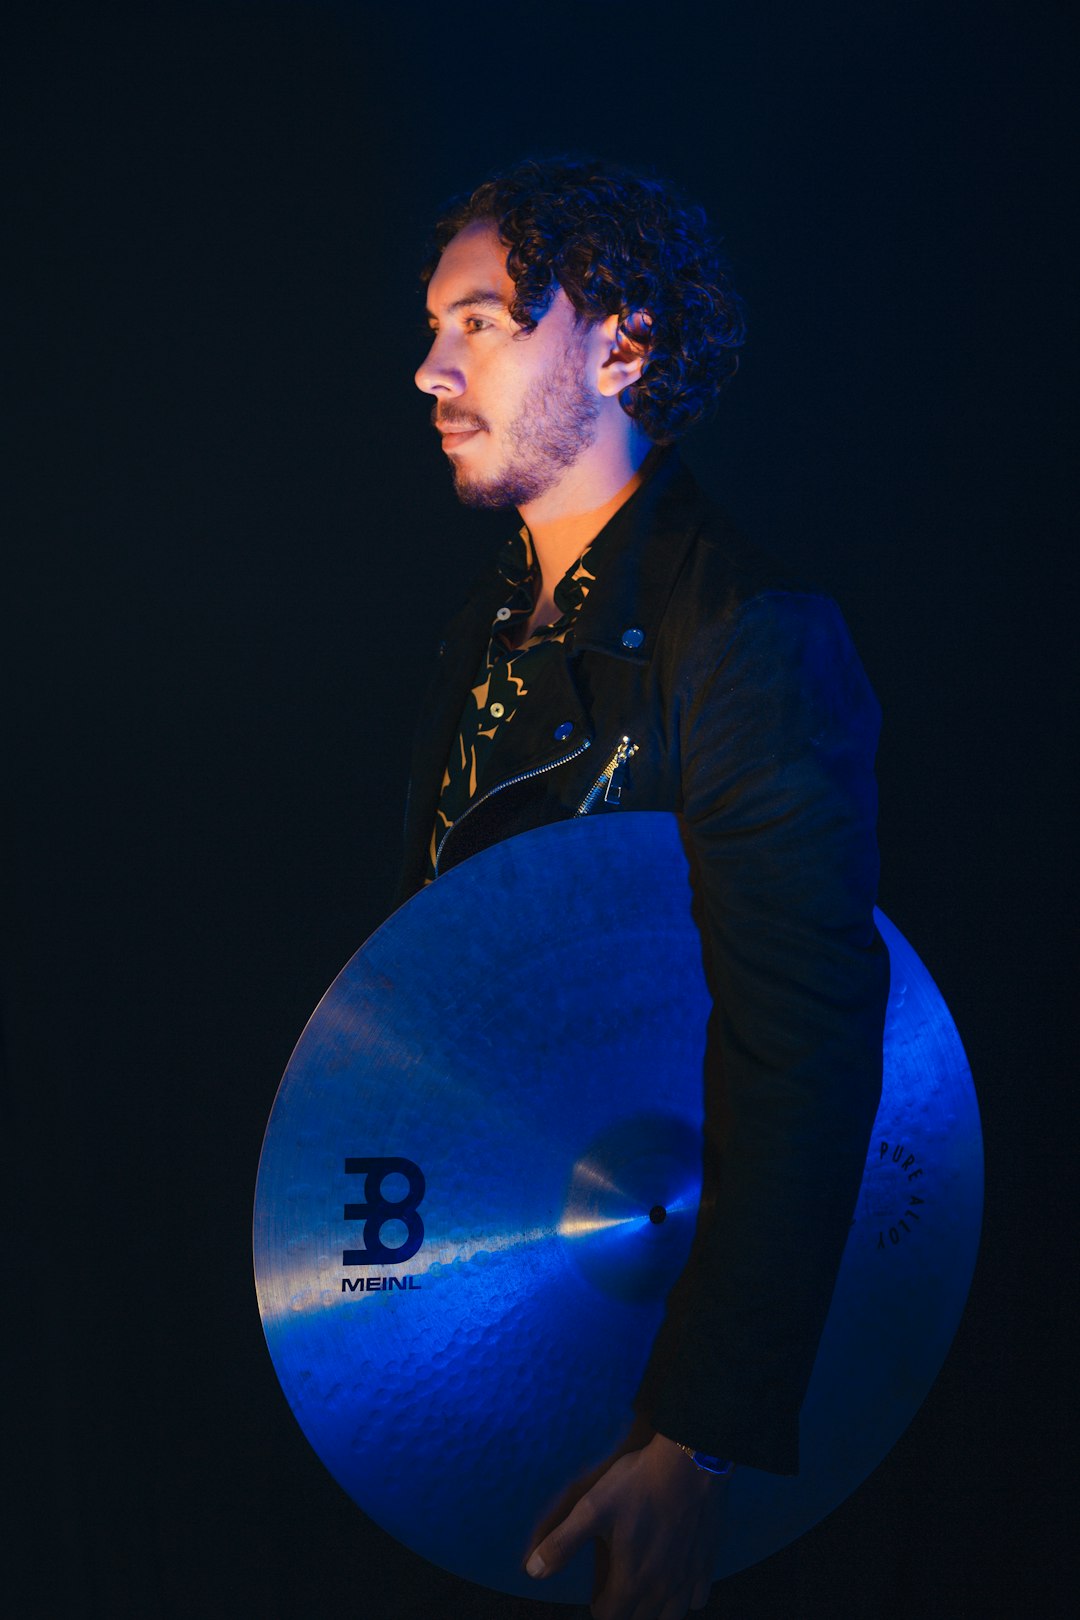 low-light photo of man holding cymbal